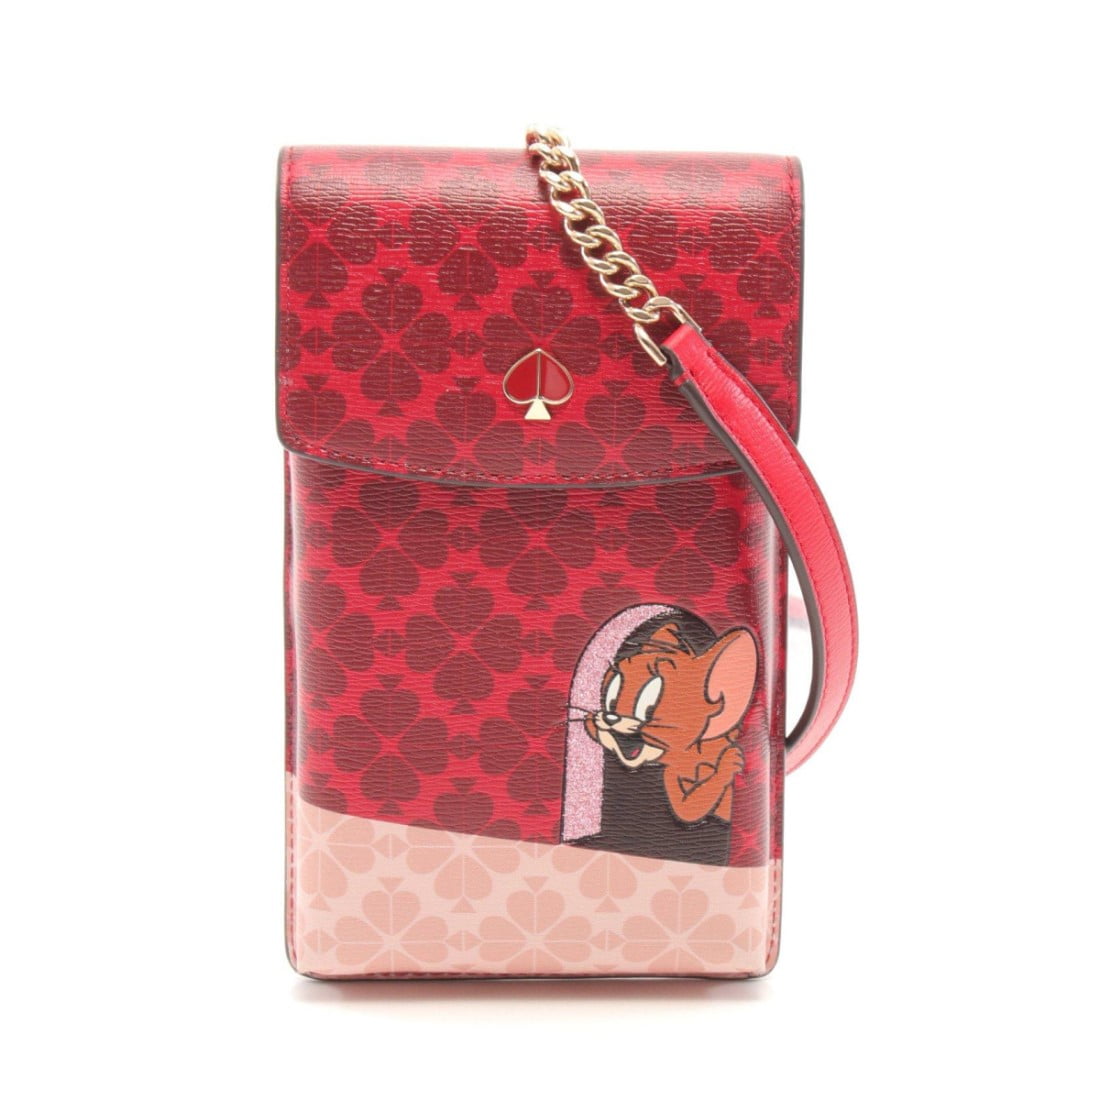 louis vuitton tom and jerry